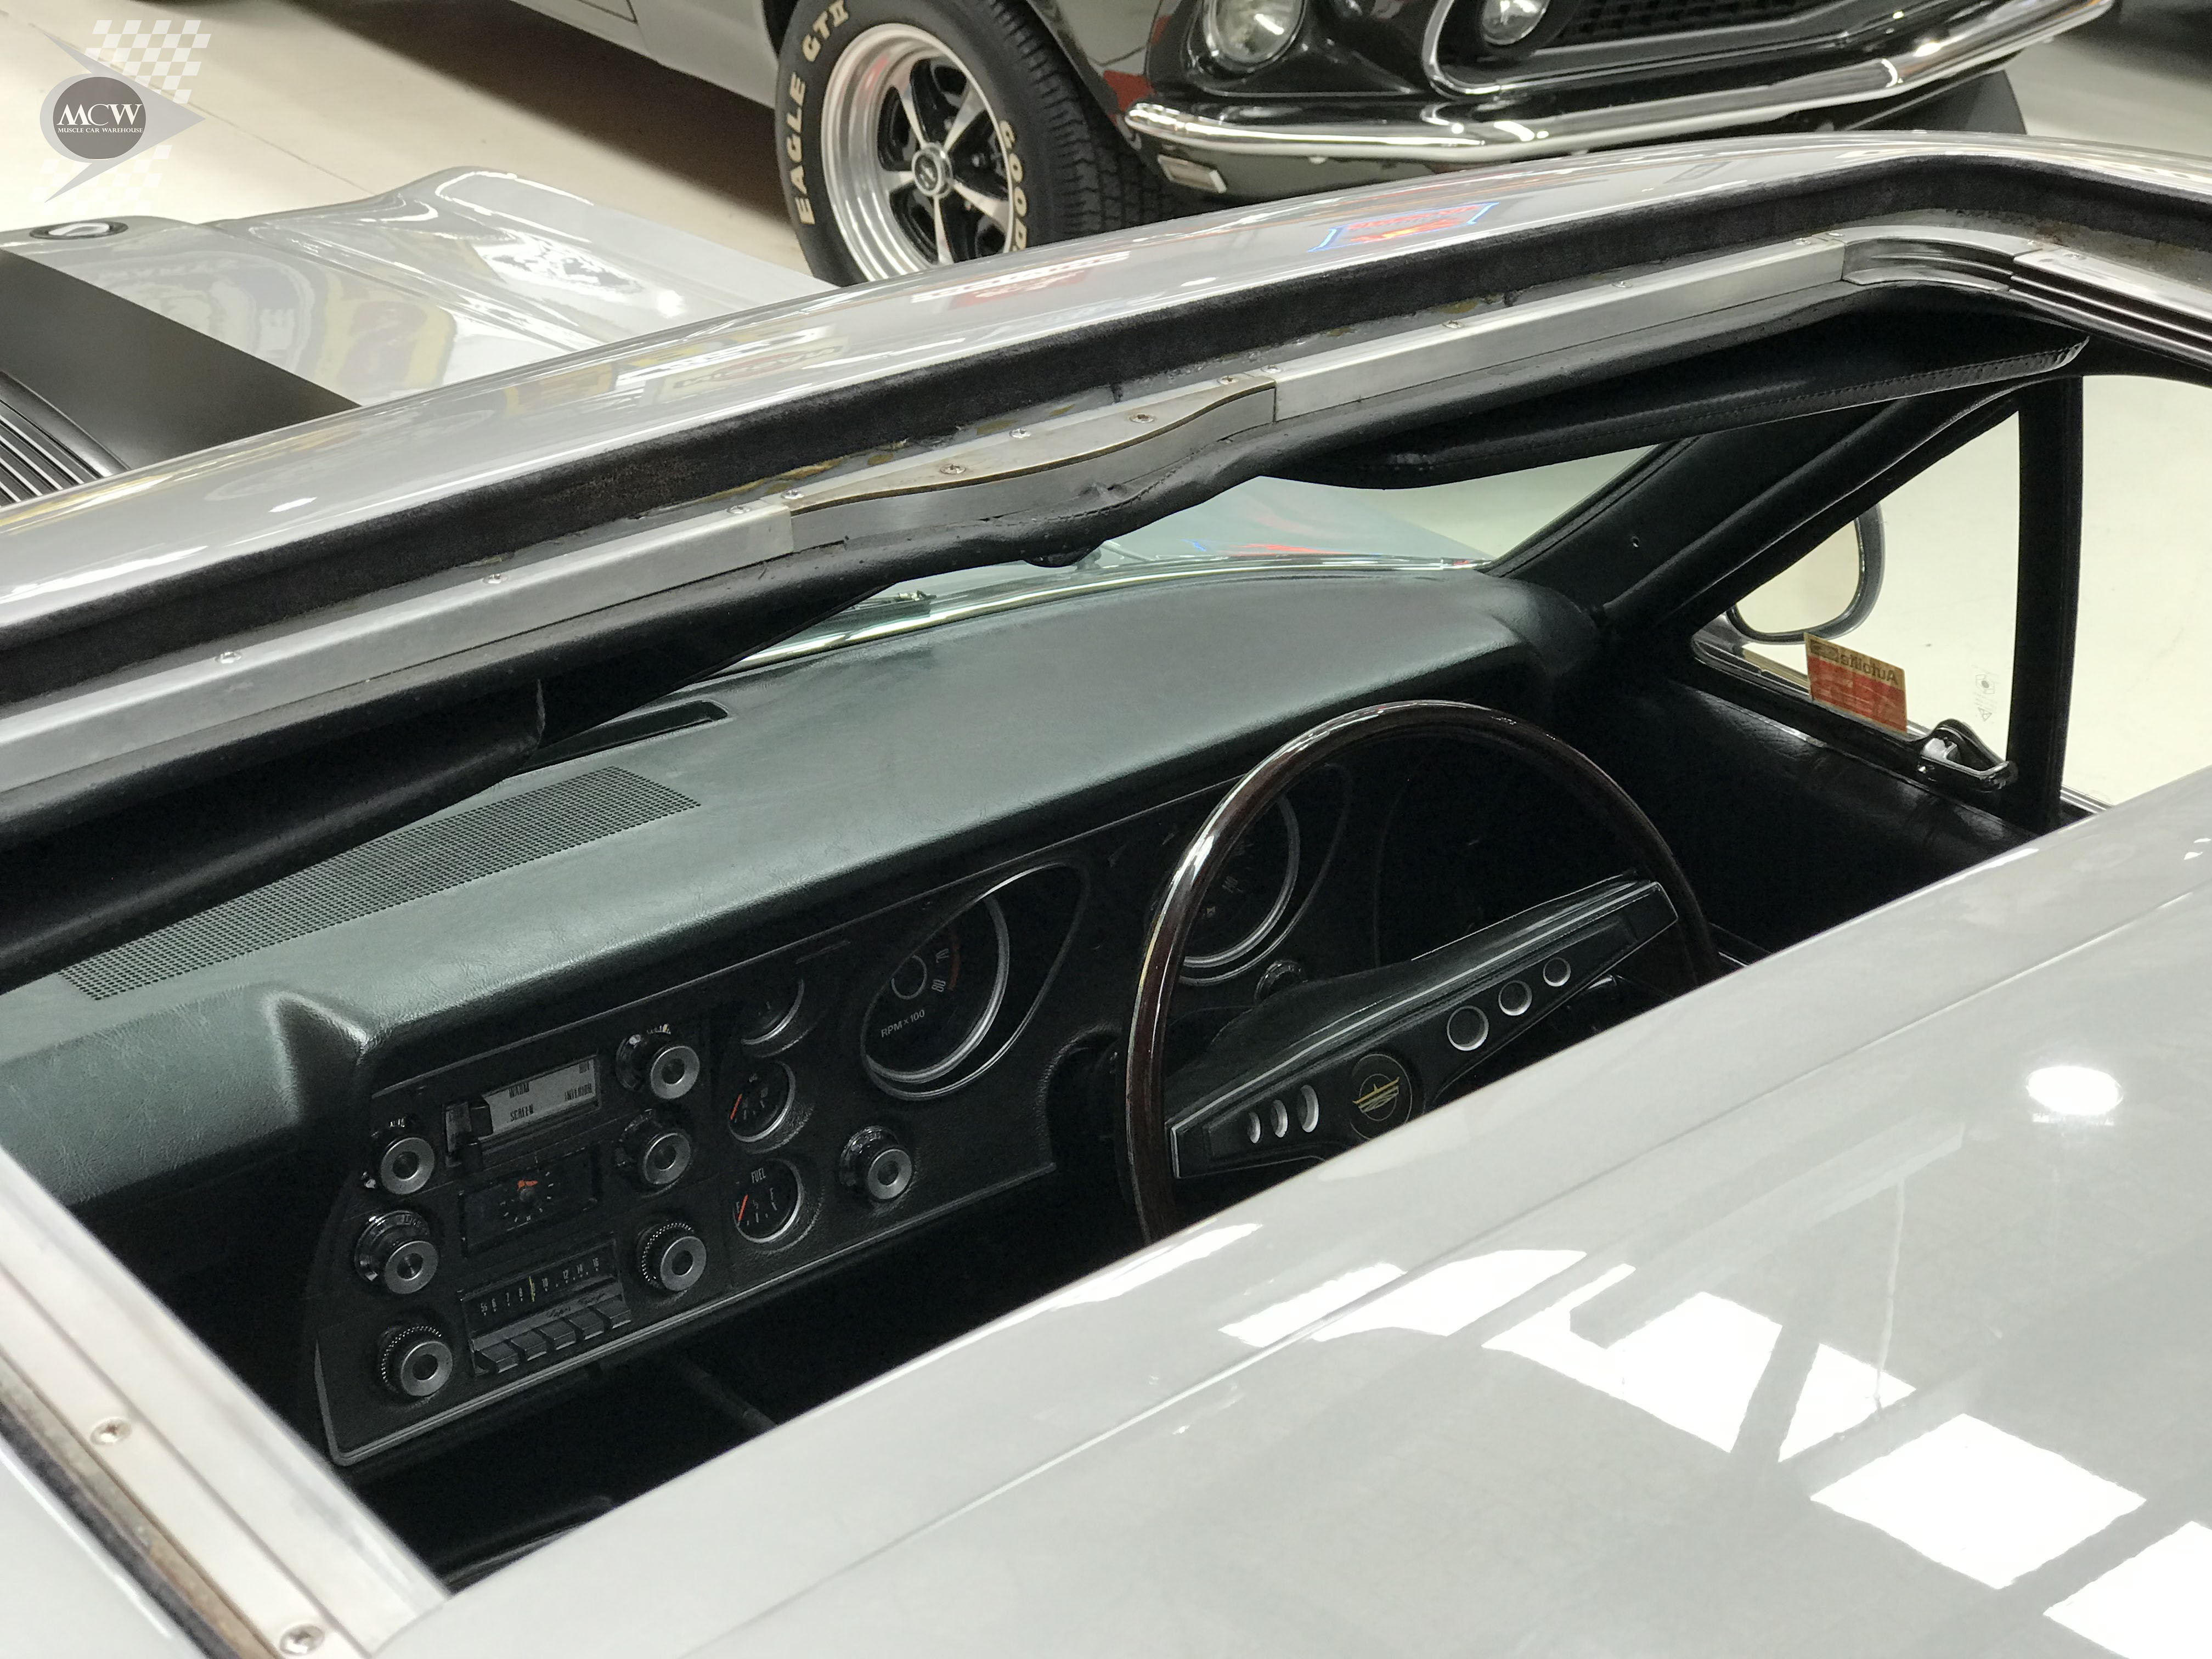 Ford Falcon XY GT Replica Sunroof | Muscle Car Warehouse